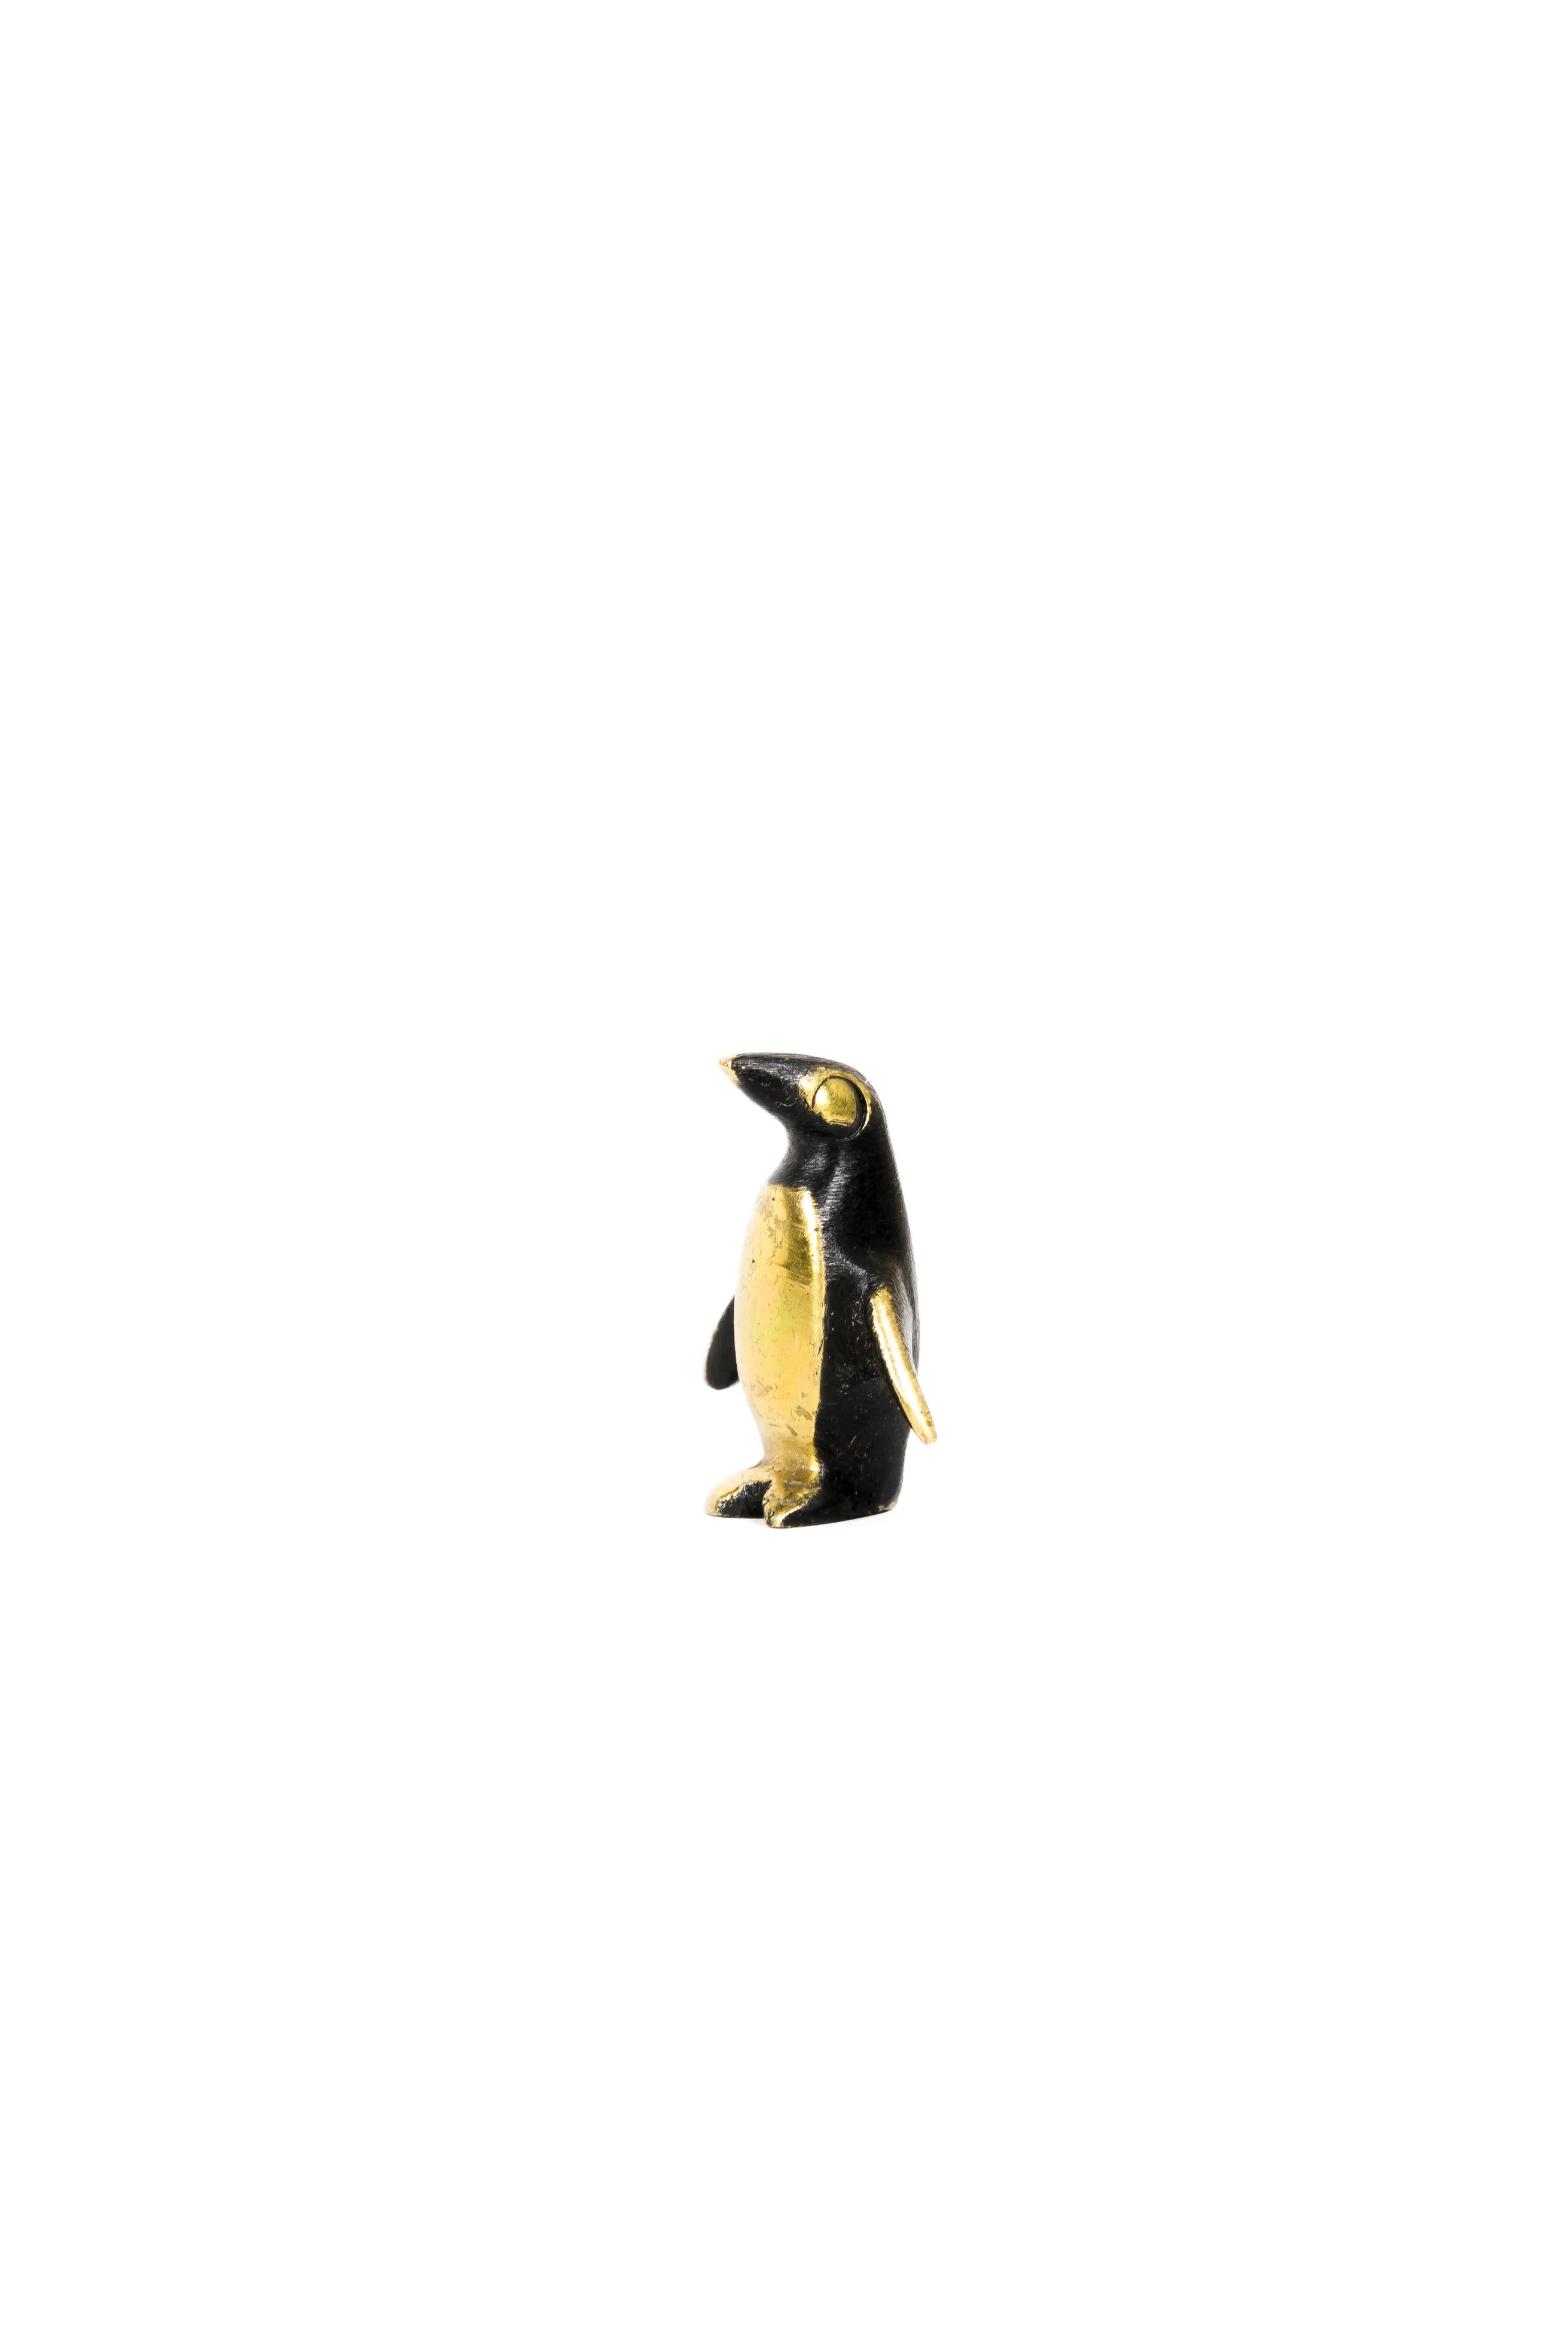 Small penguin by Walter bosse, around 1950s
Marked Austria on Bottom
Original condition.
 